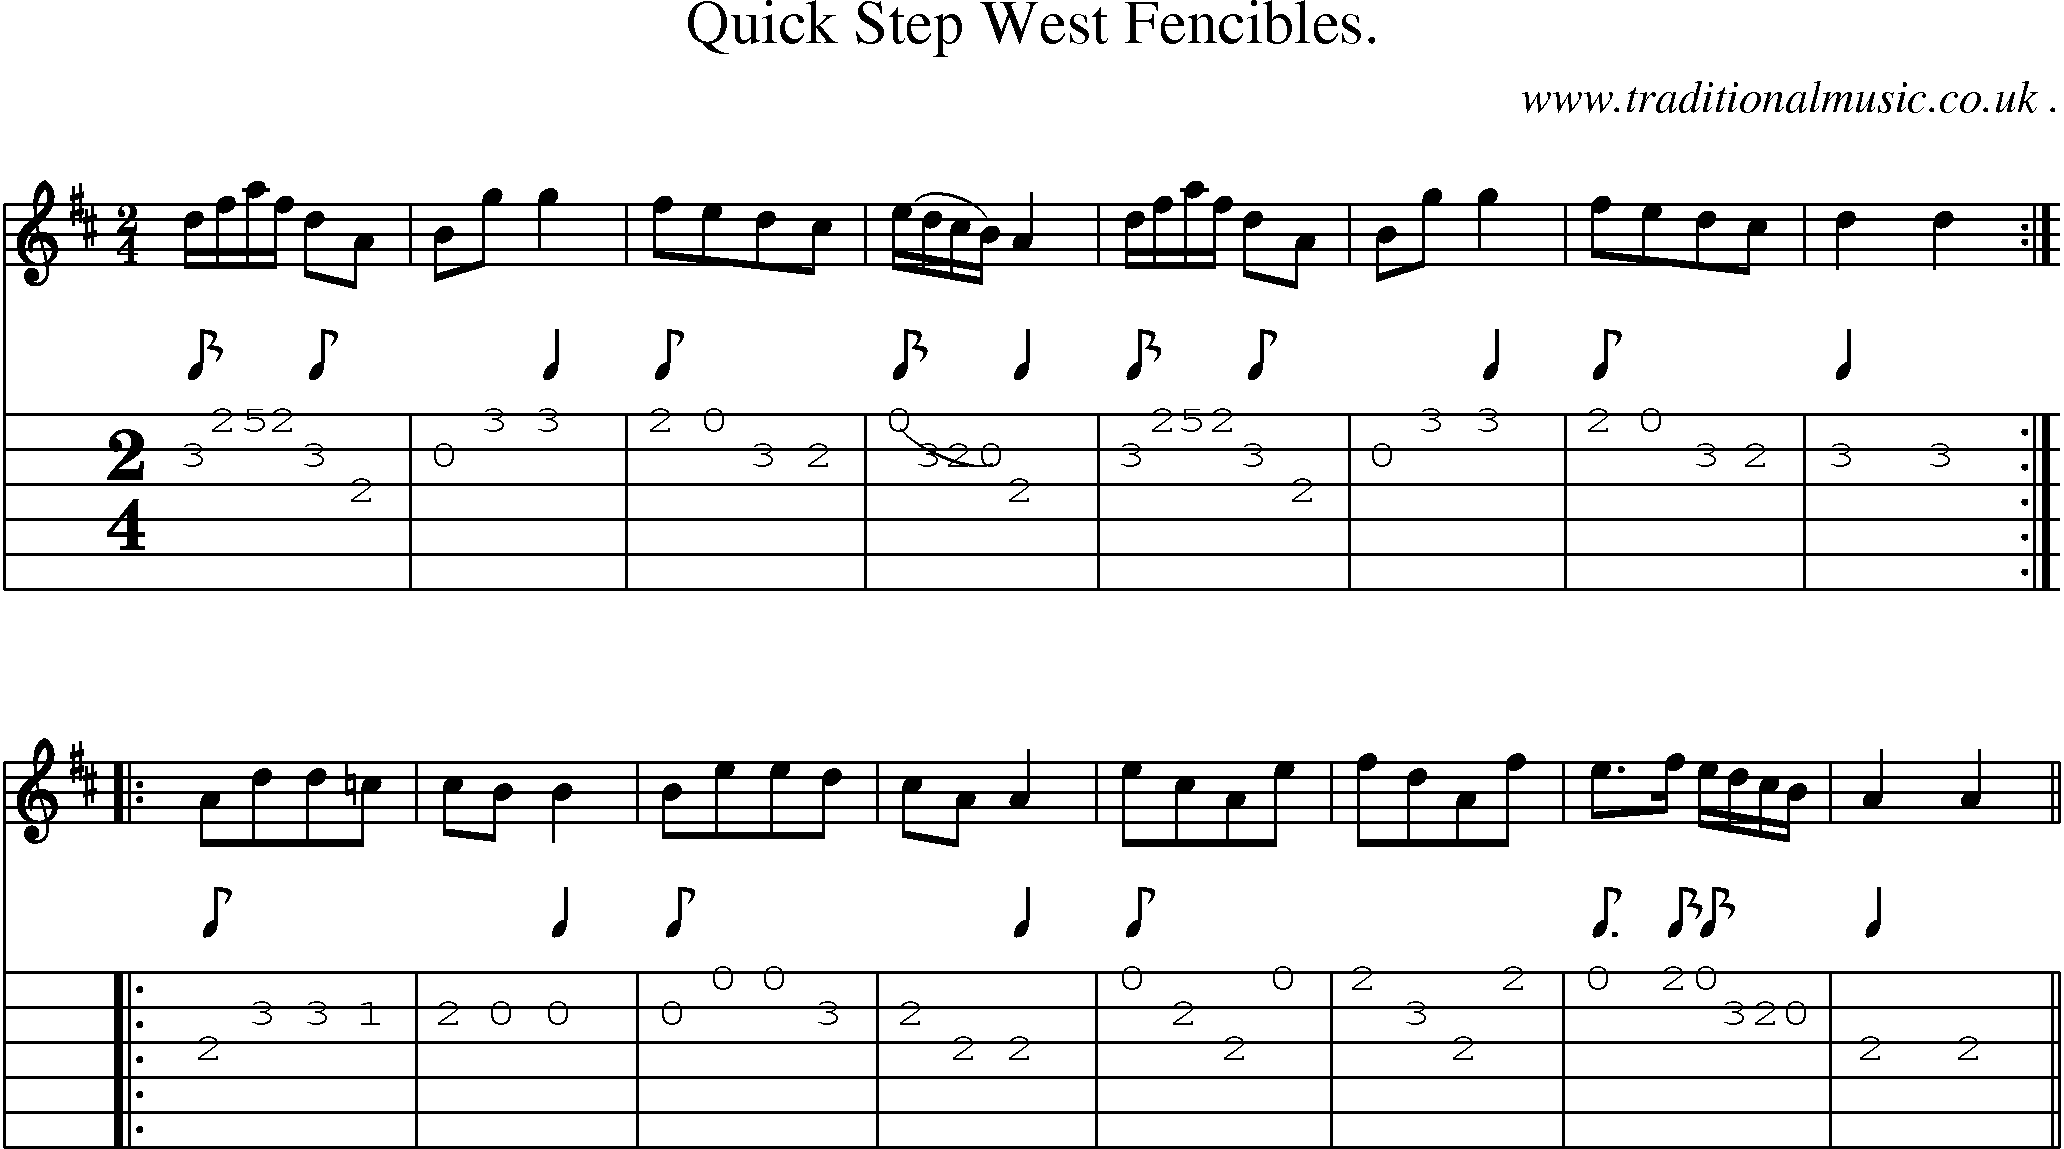 Sheet-Music and Guitar Tabs for Quick Step West Fencibles